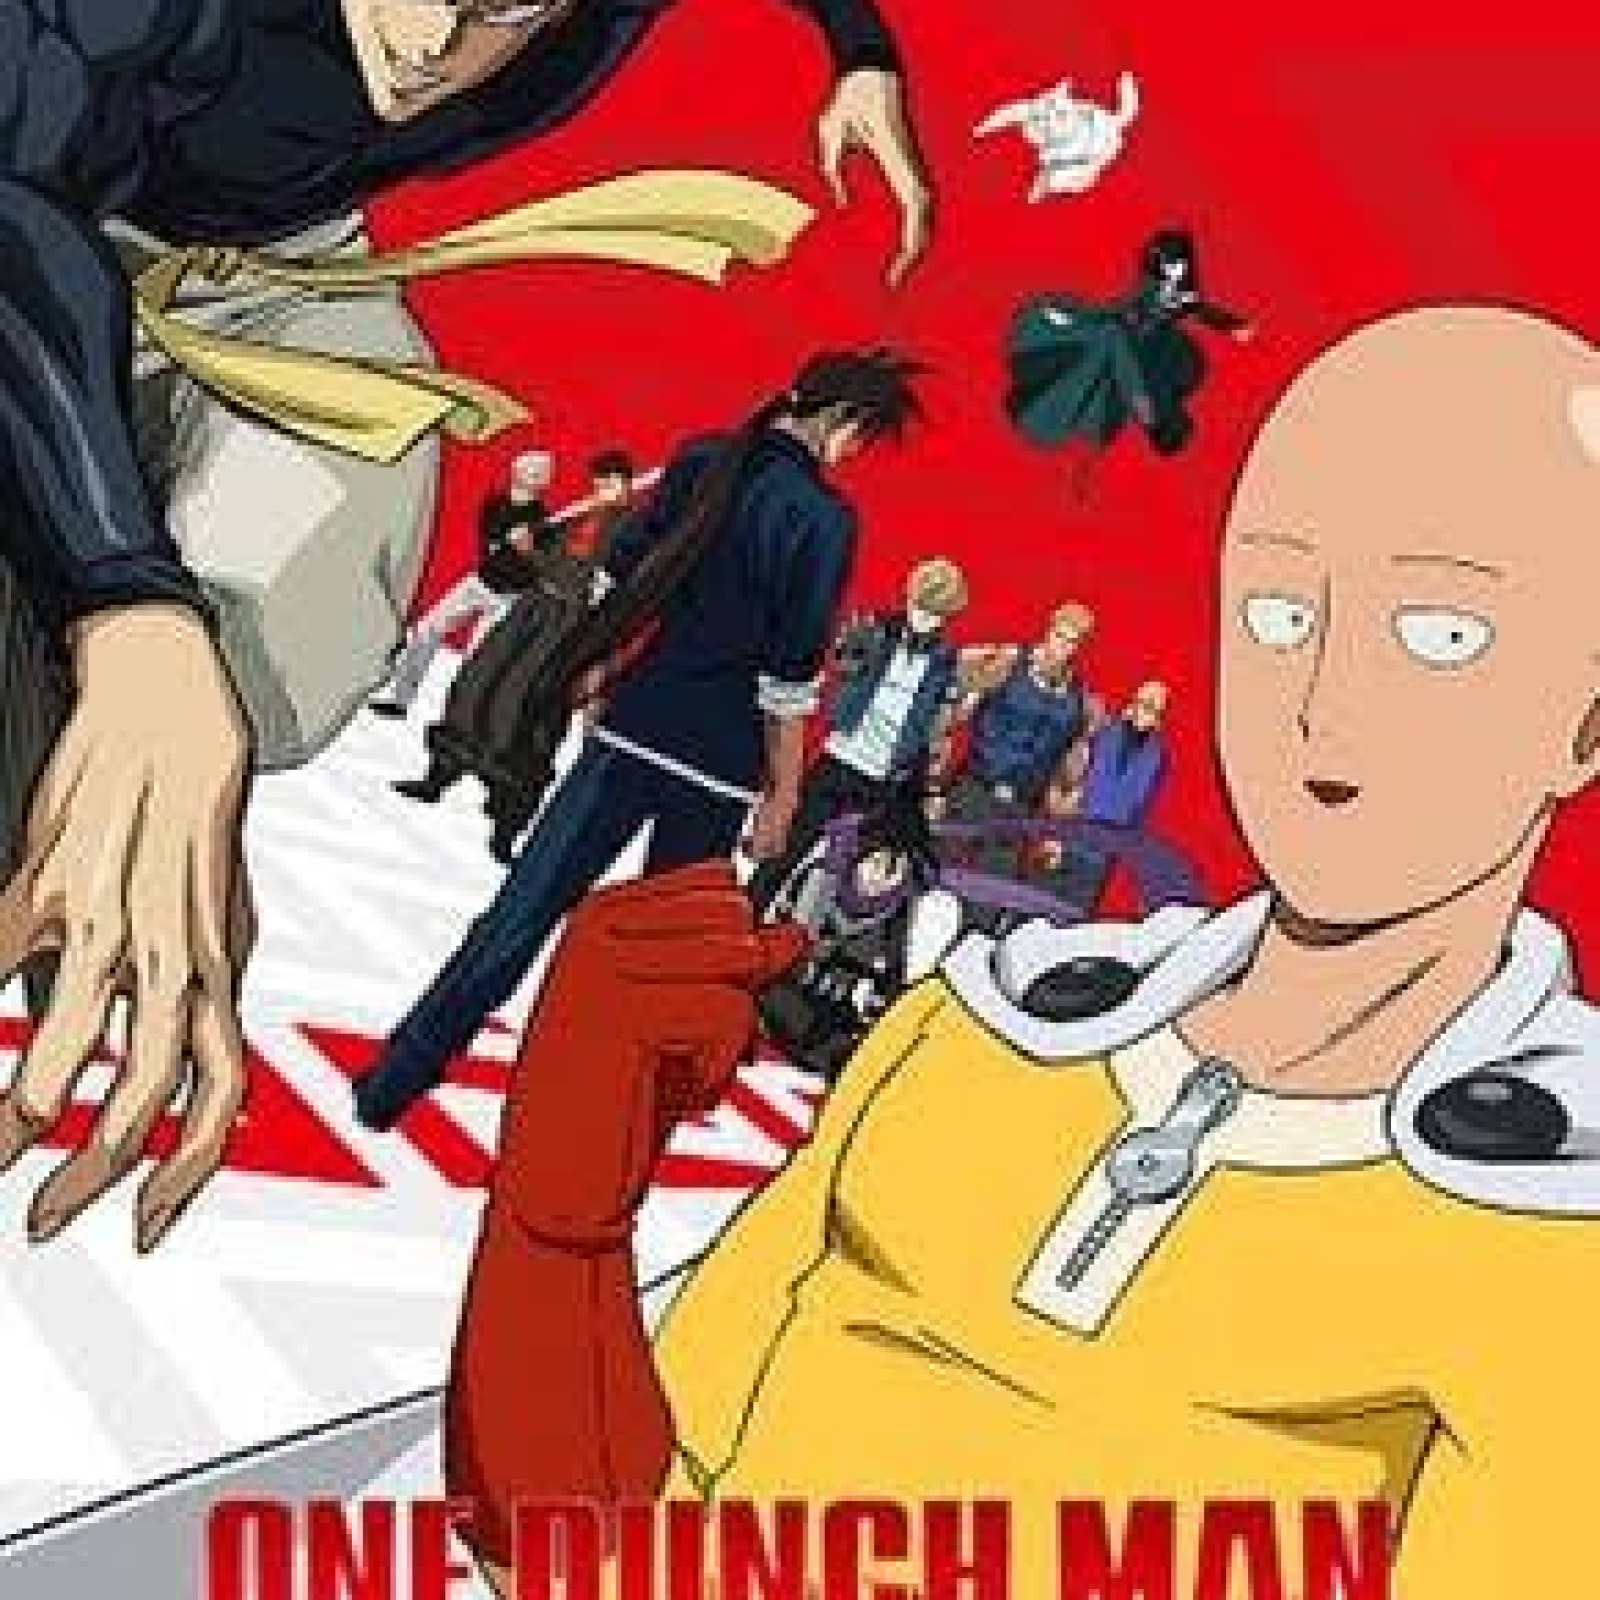 Where can I watch One Punch Man 2nd Season English dubbed online? - Quora